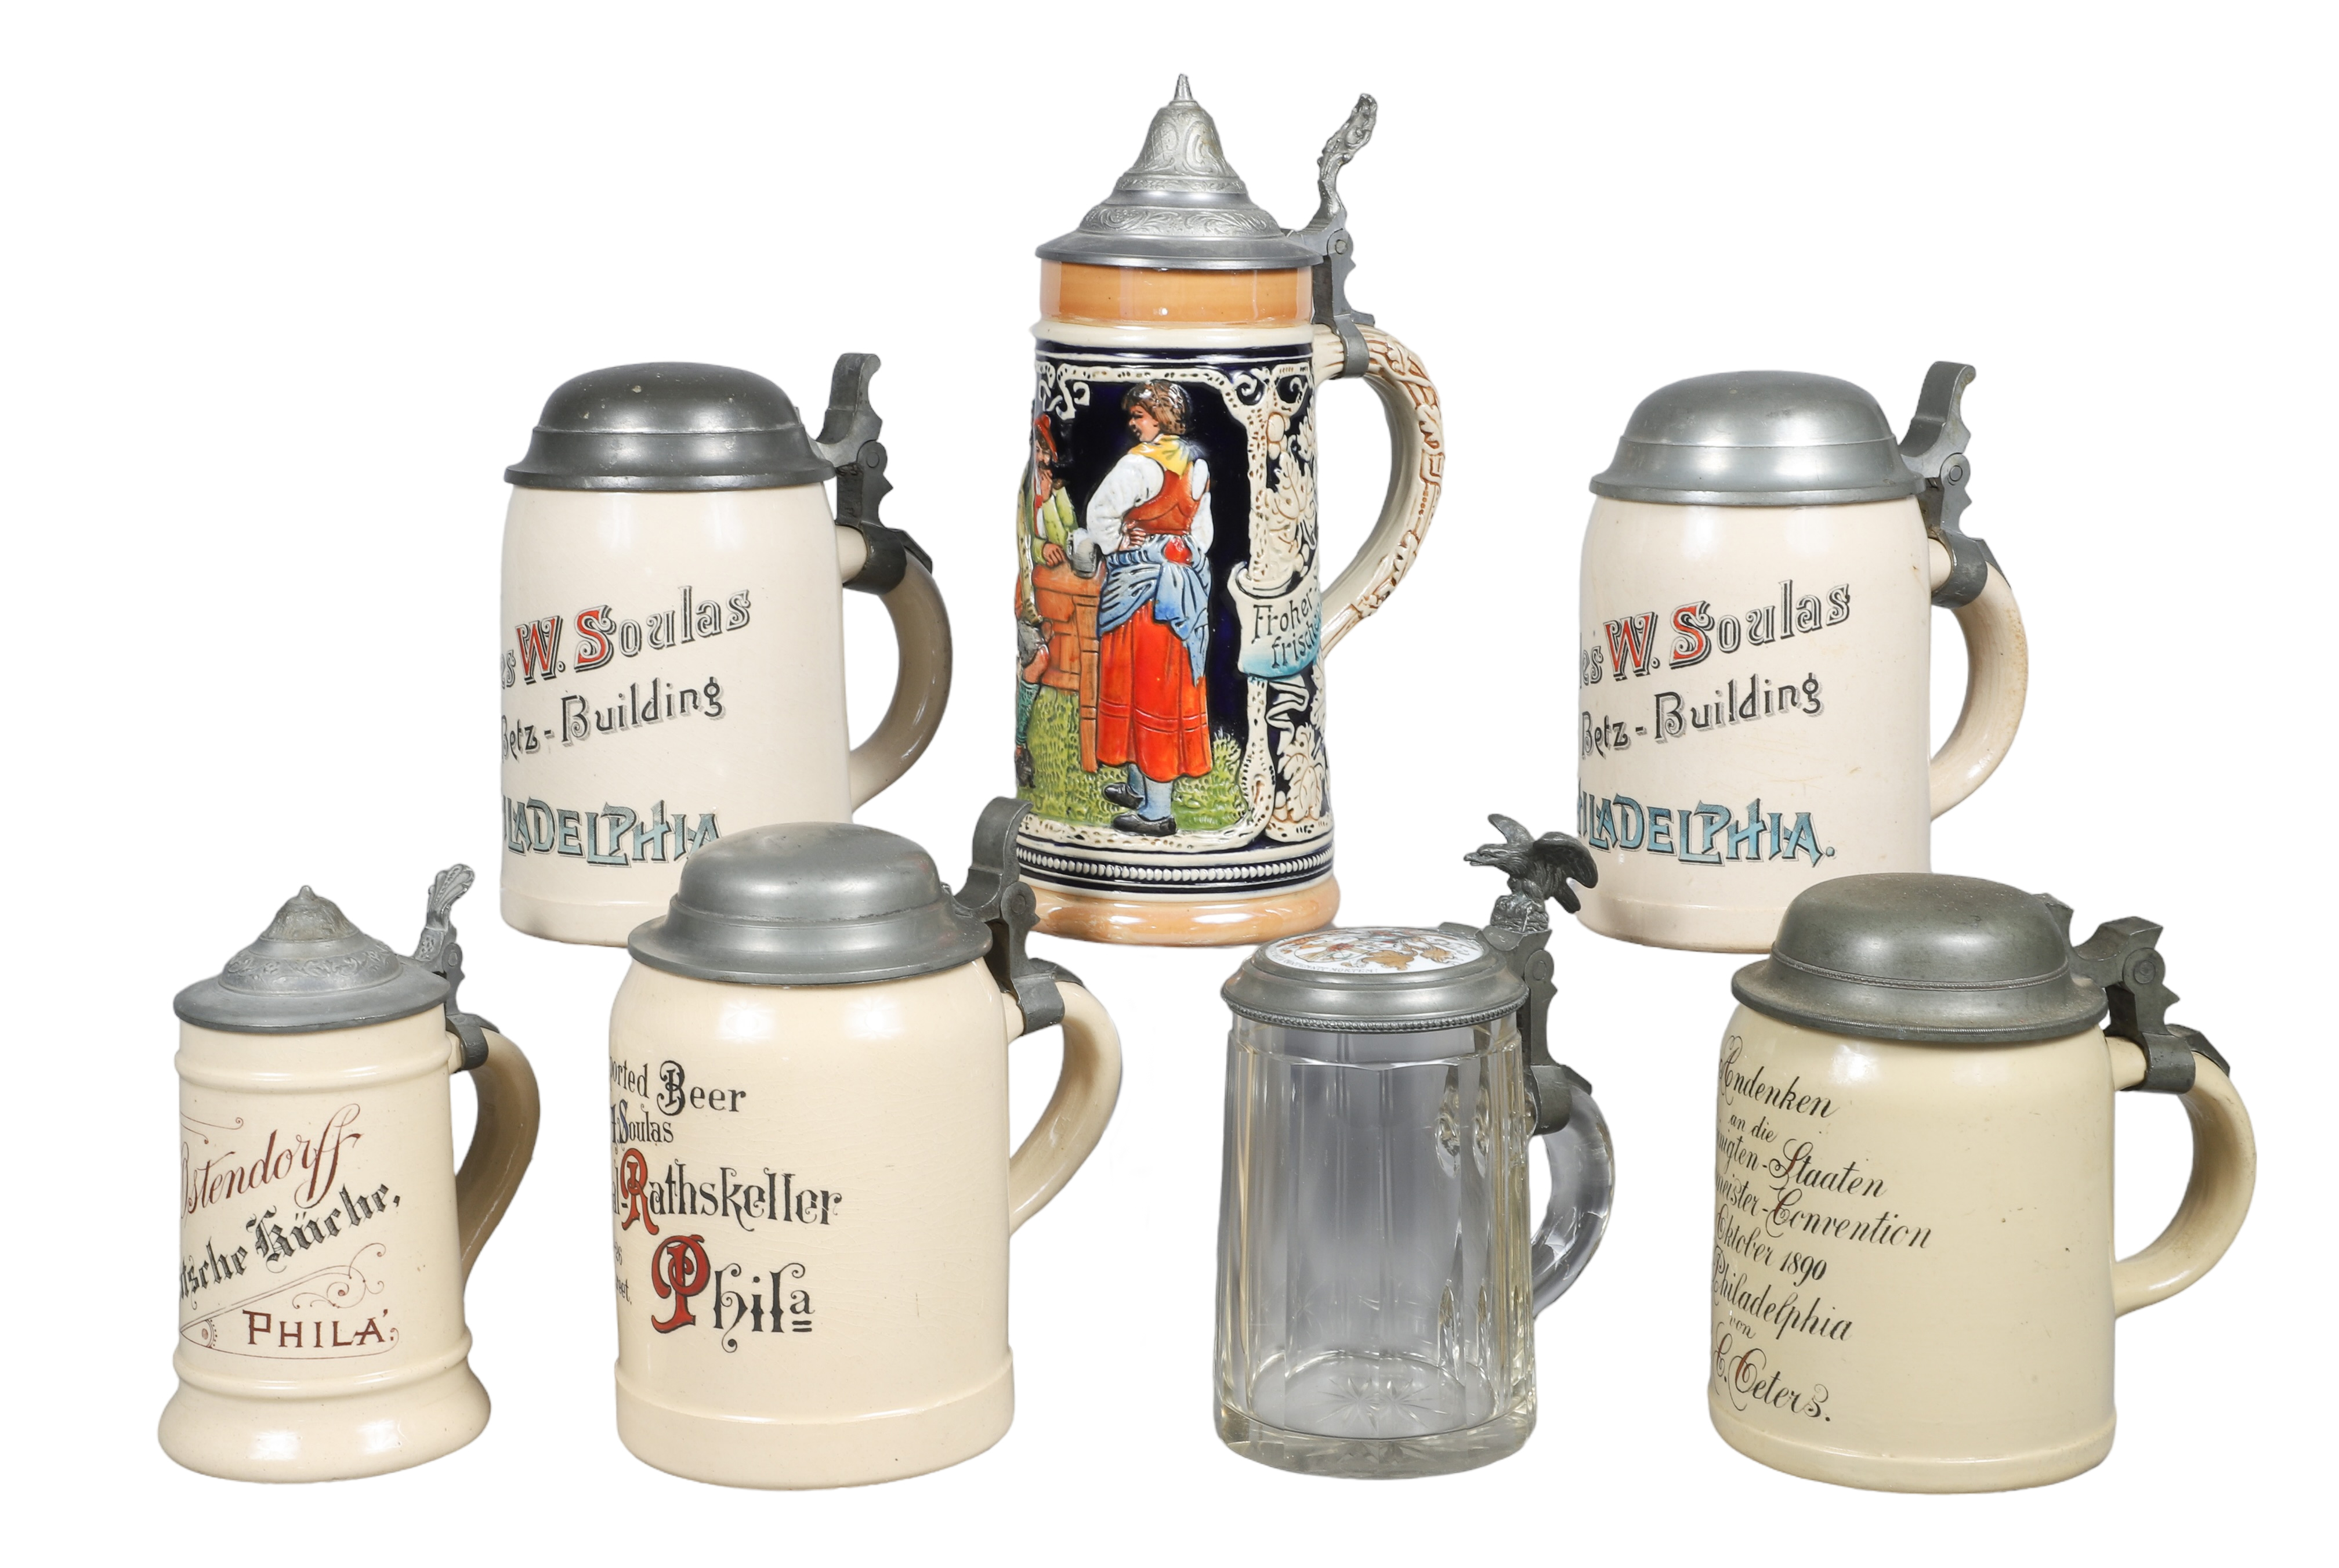  7 Advertising beer steins with 317f8f